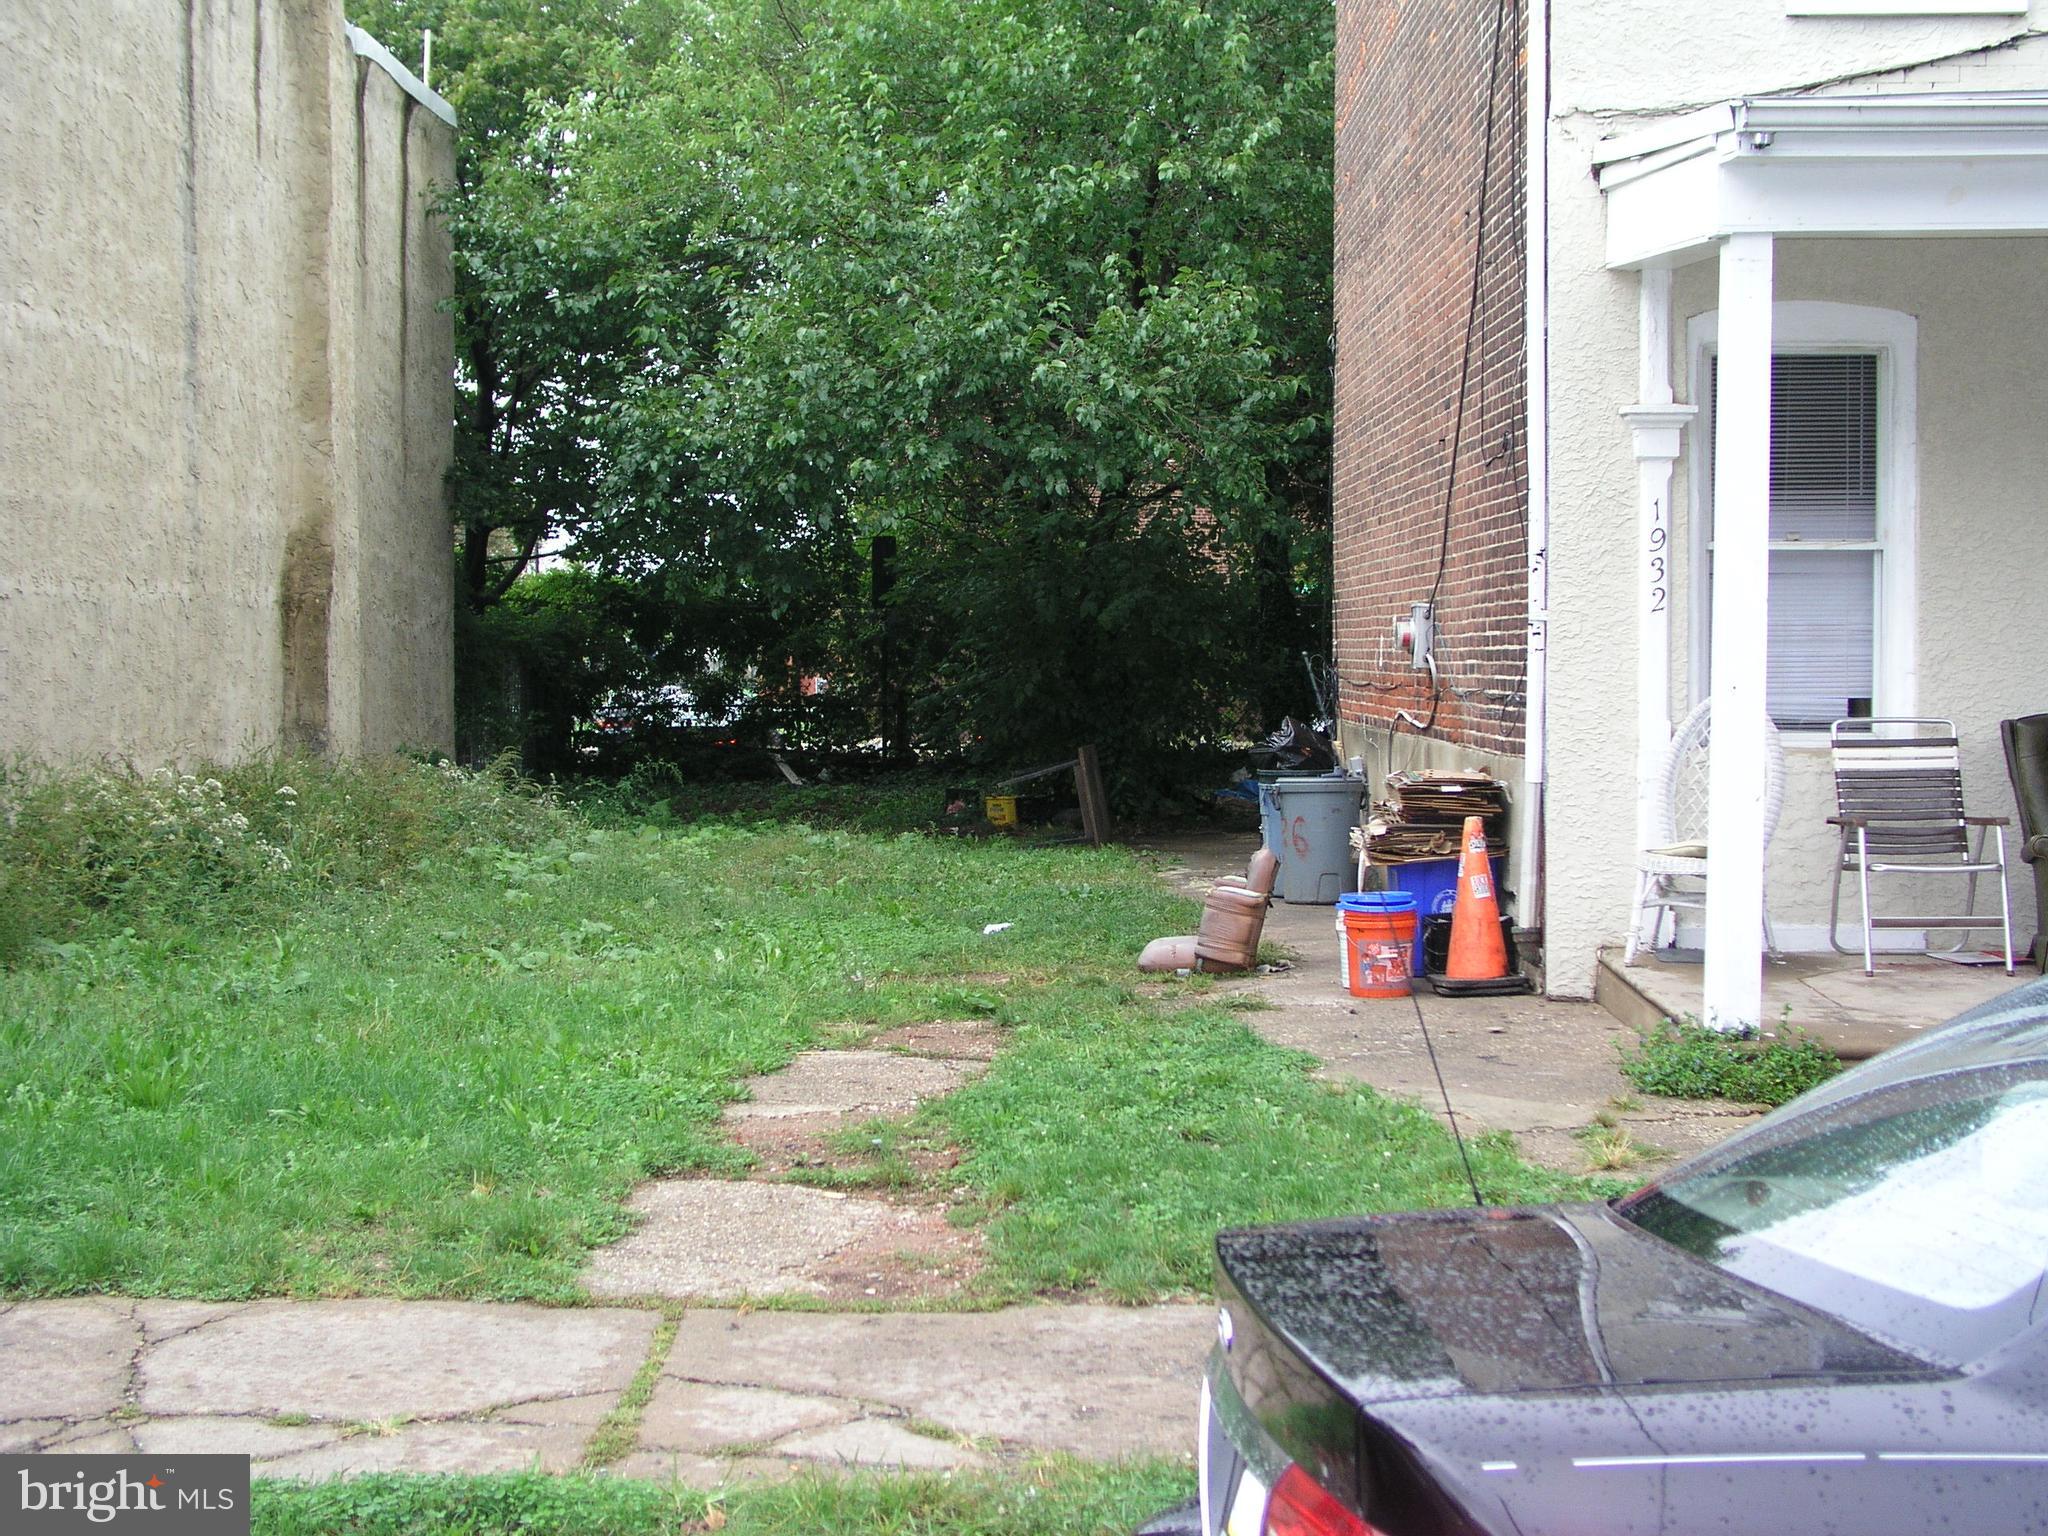 a view of a backyard with sitting area and slide